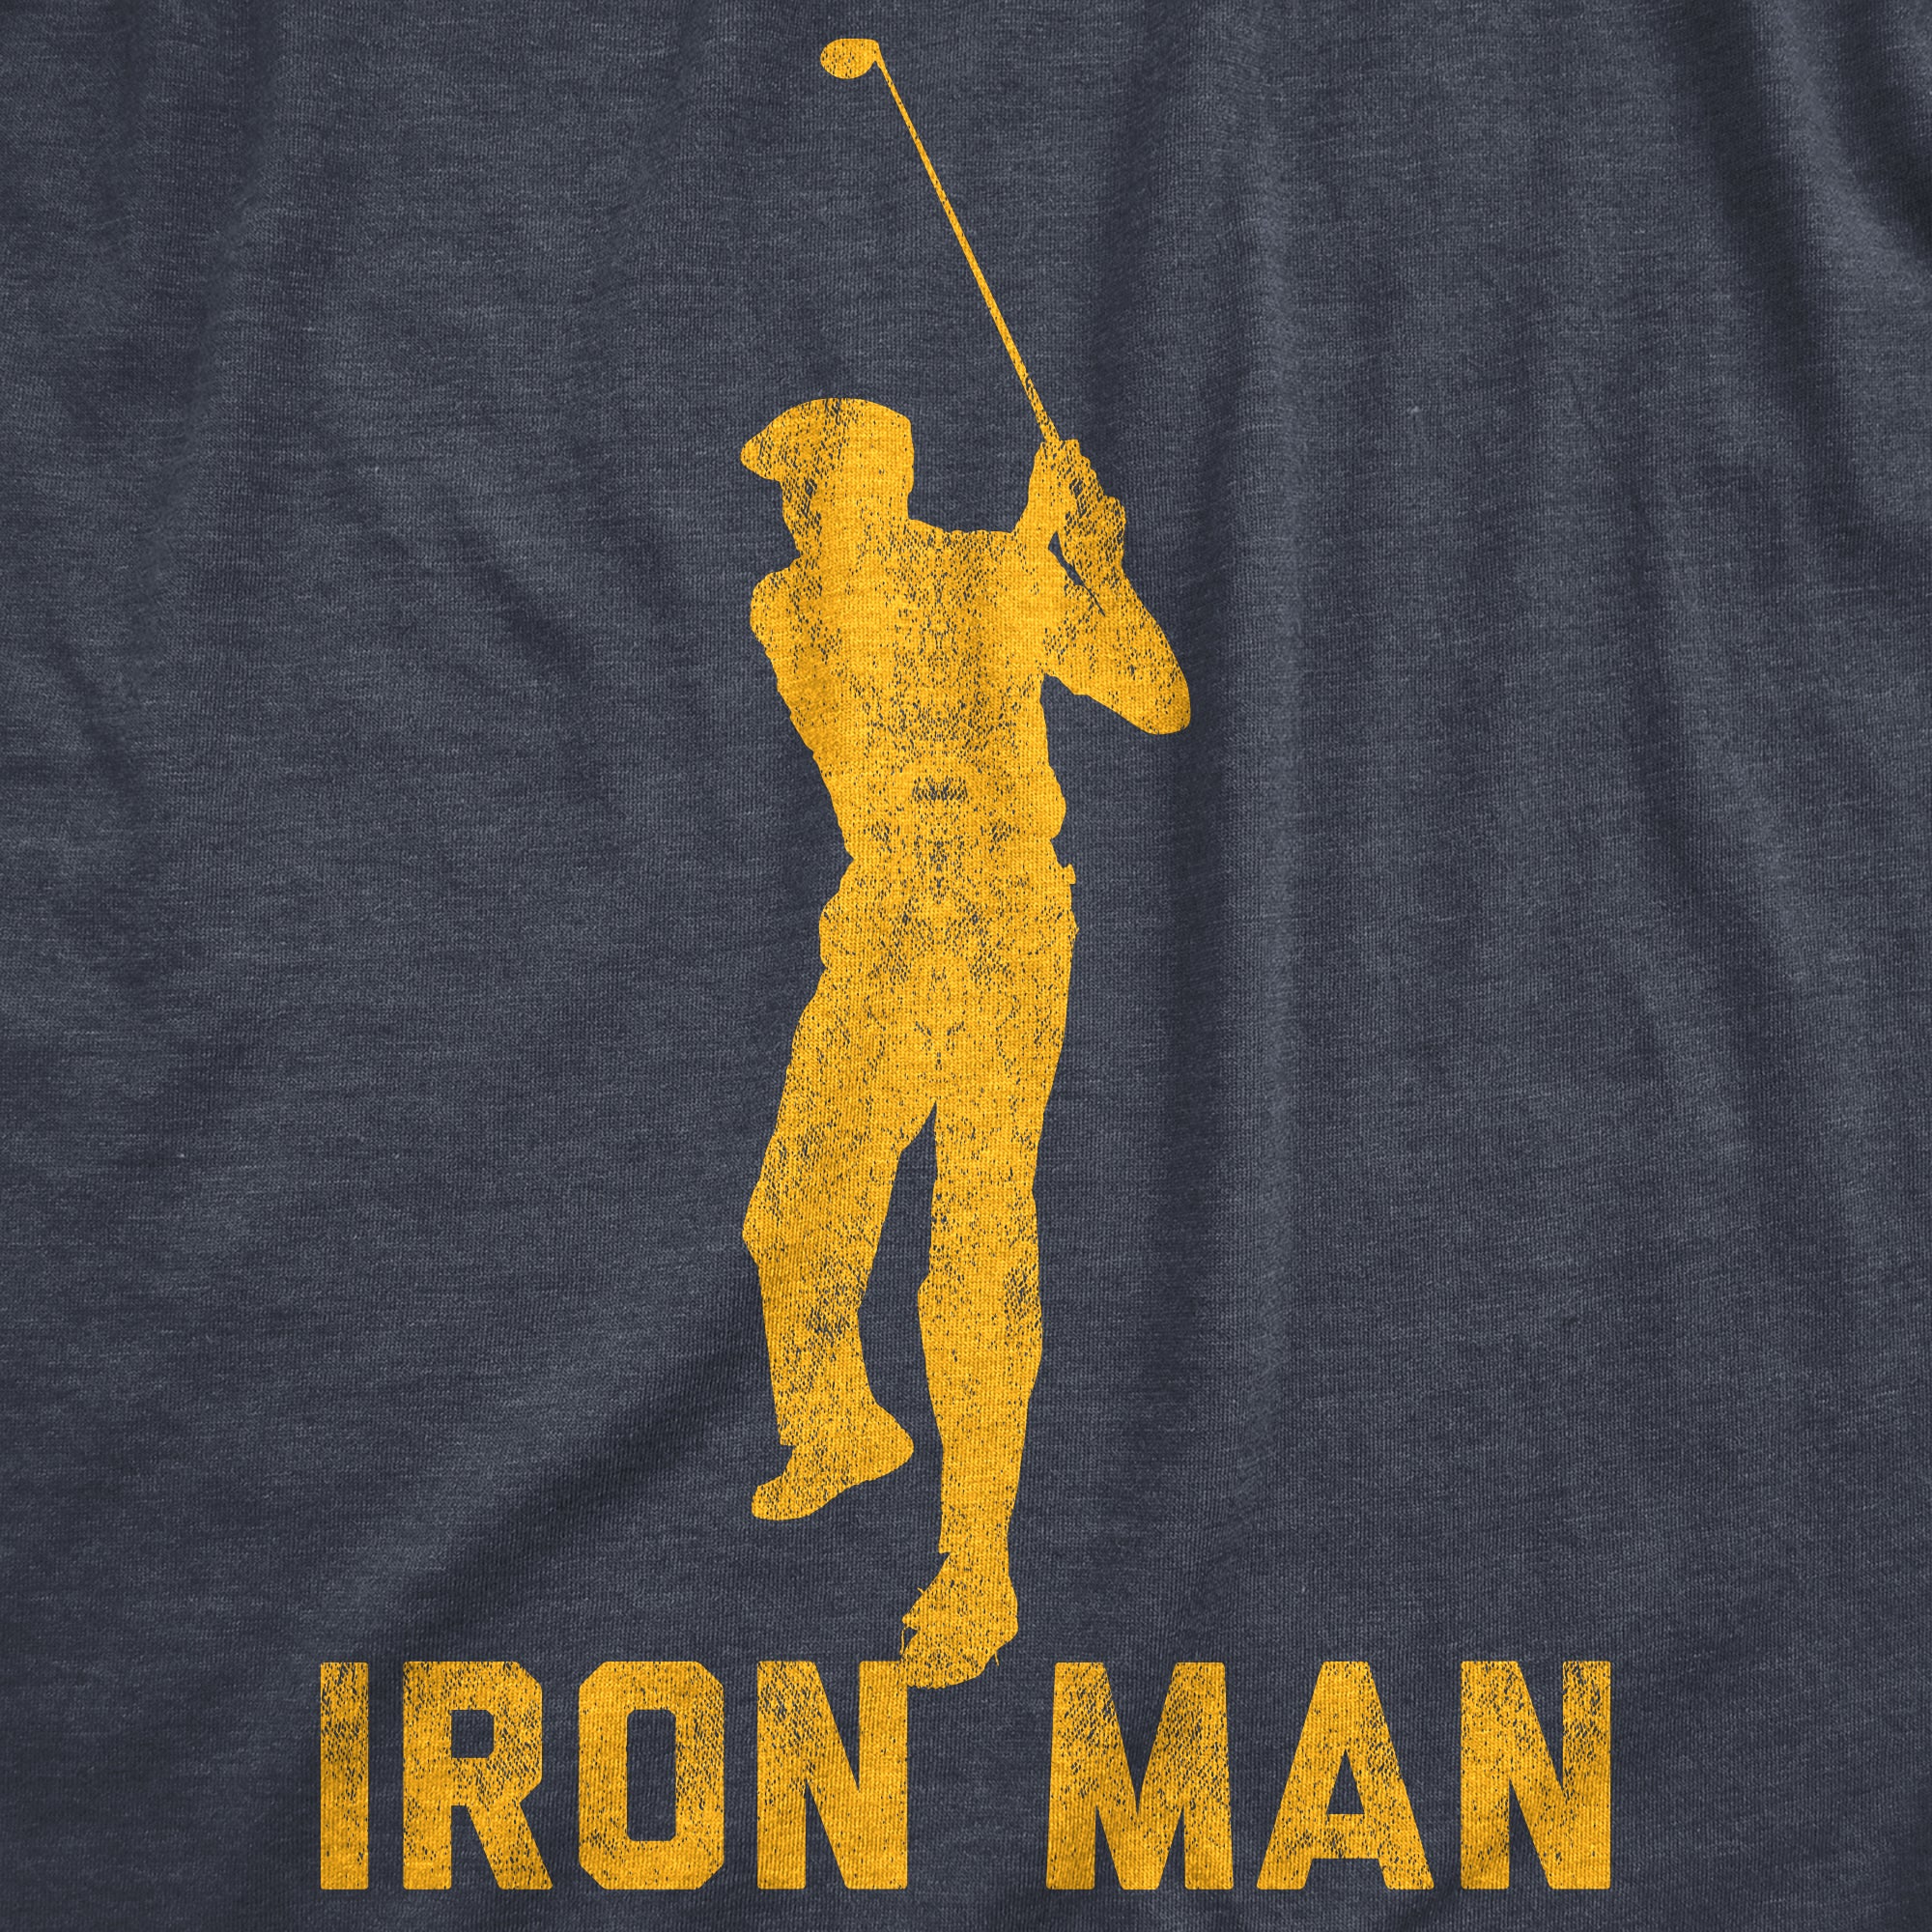 Funny Heather Navy - Iron Man Iron Man Mens T Shirt Nerdy Father's Day Golf TV & Movies Tee